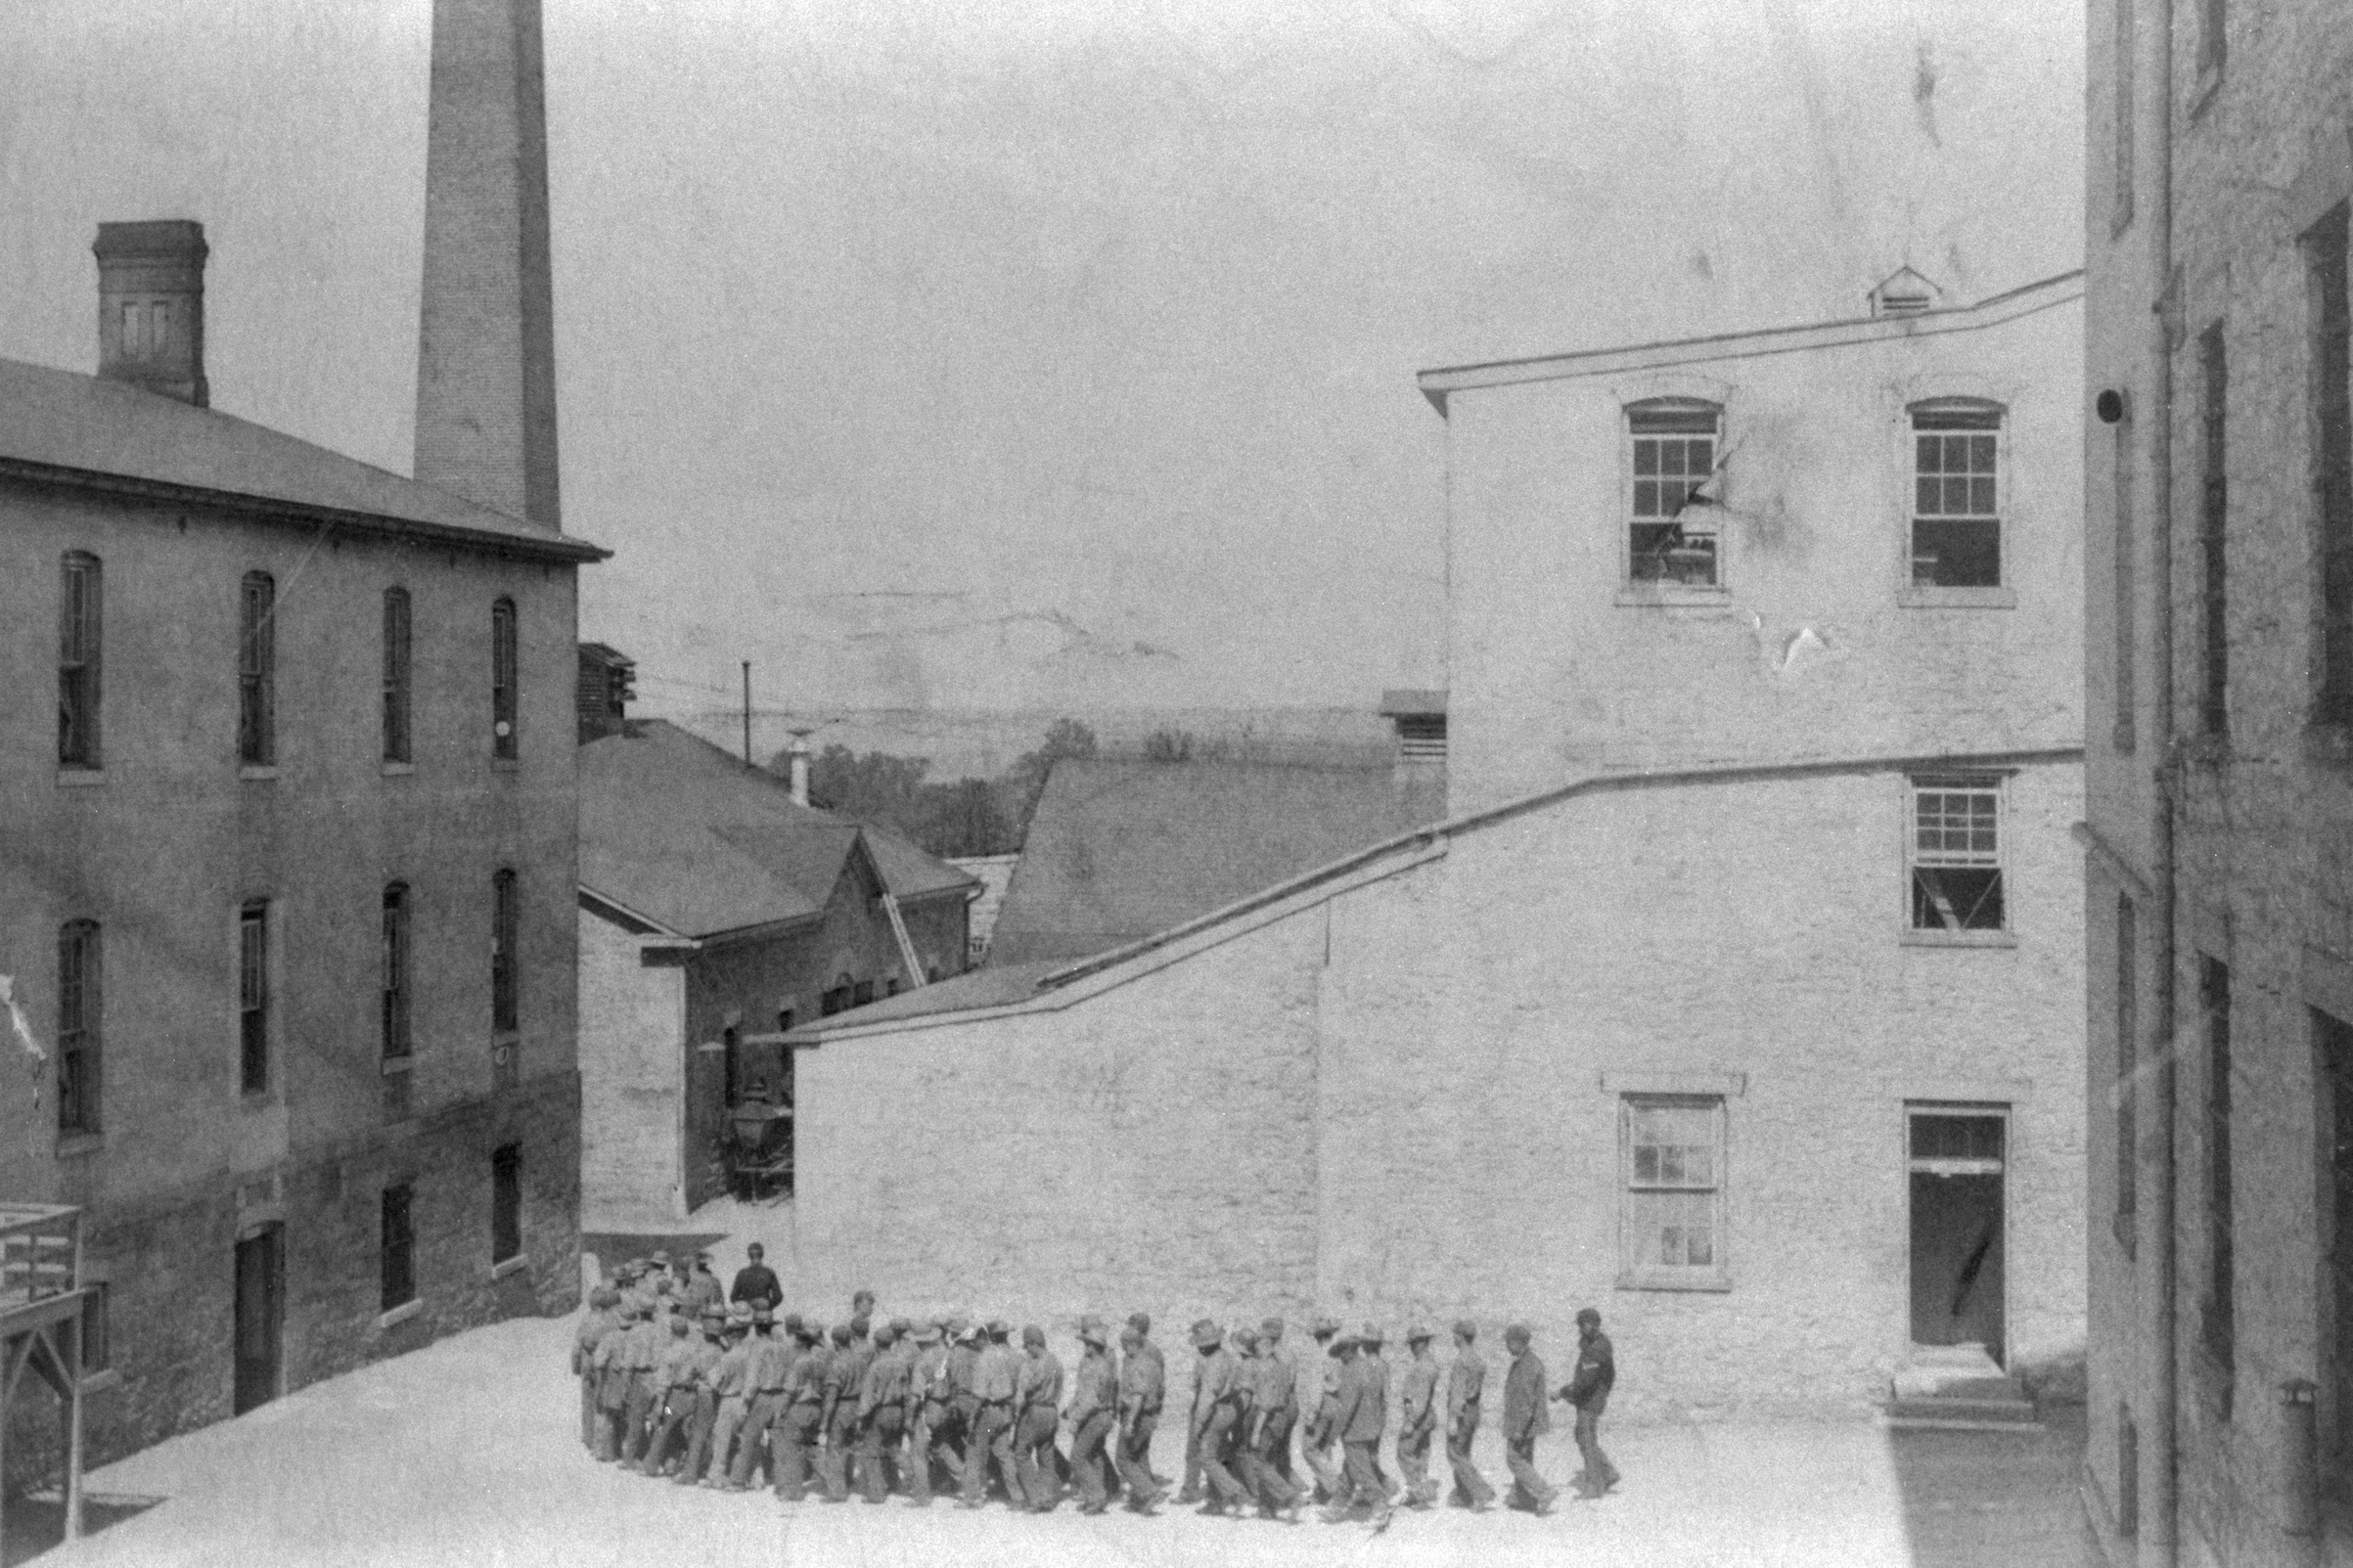 Prisoners at Fort Leavenworth Penetentiary march in a line to the mess hall for dinner ca. 1890s. (Historical/Corbis/Getty Images)